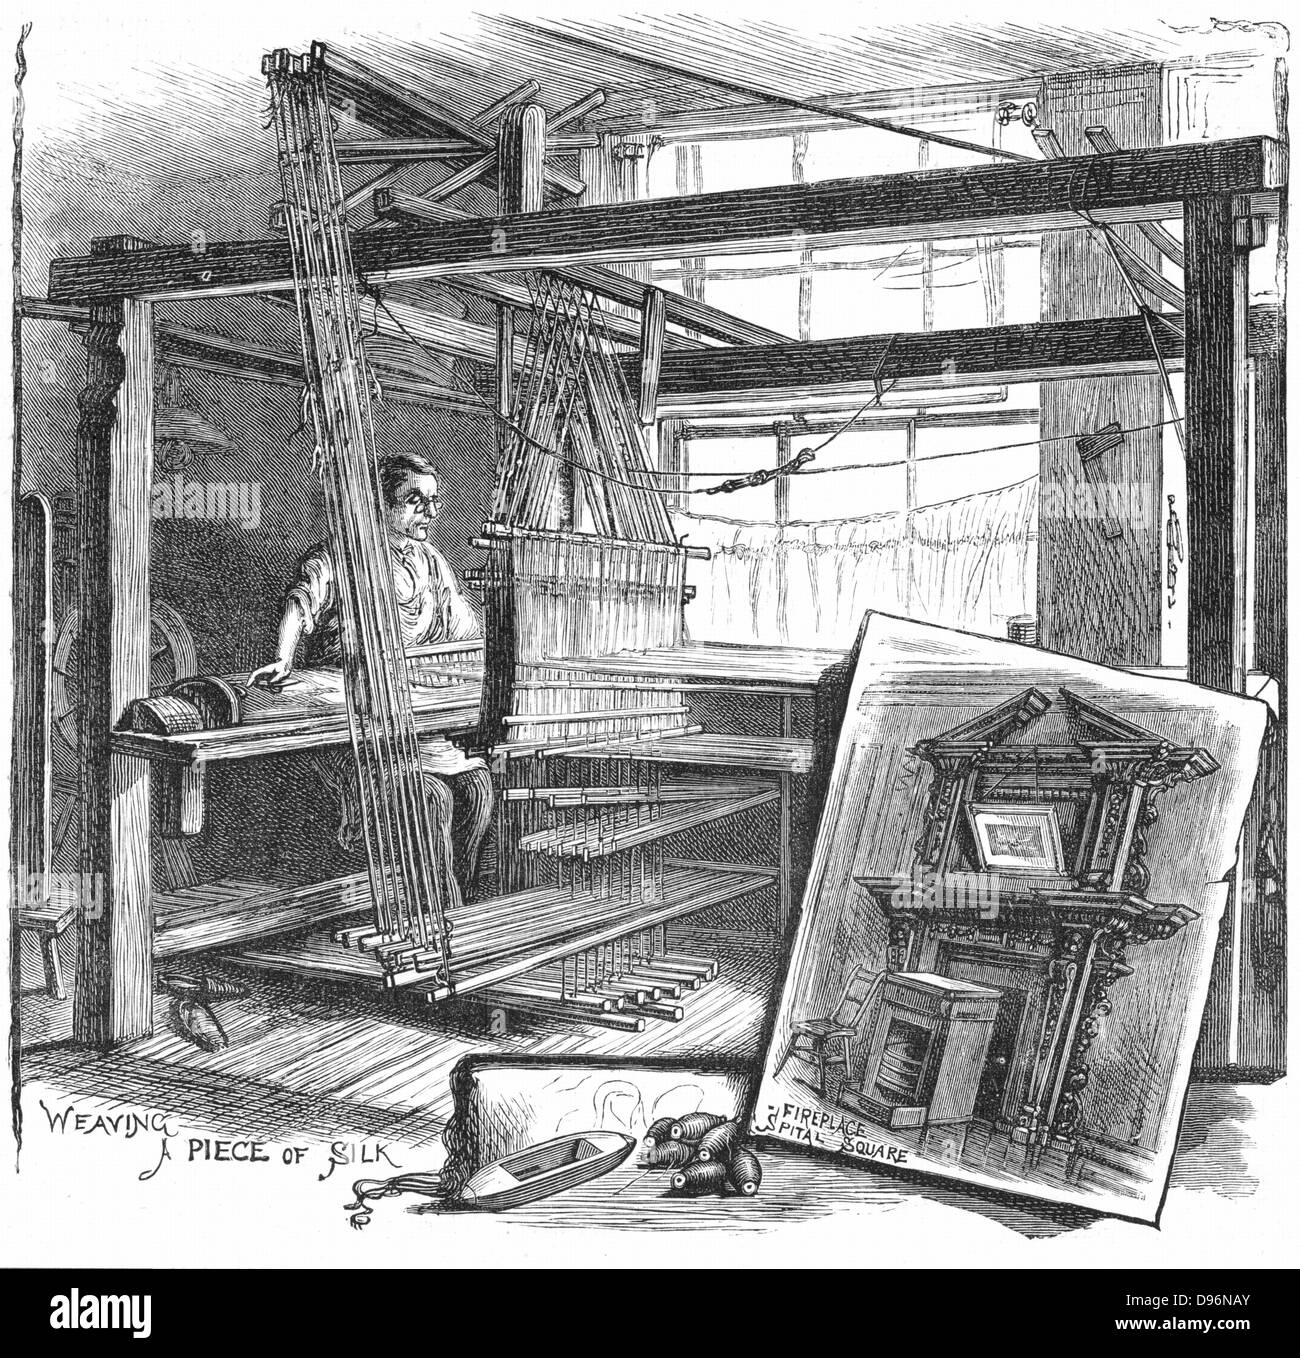 A Spitalfields silk weaver: This man could earn 70p in a good week, but by this date the industry had declined and work was hard to come by. The Spitalfields silk industry begun by Huguenot refugees who left France after Revocation of Edict of Nantes (1685) by Louis XIV. From 'Cassell's Family Magazine', London 1884. Engraving. Stock Photo